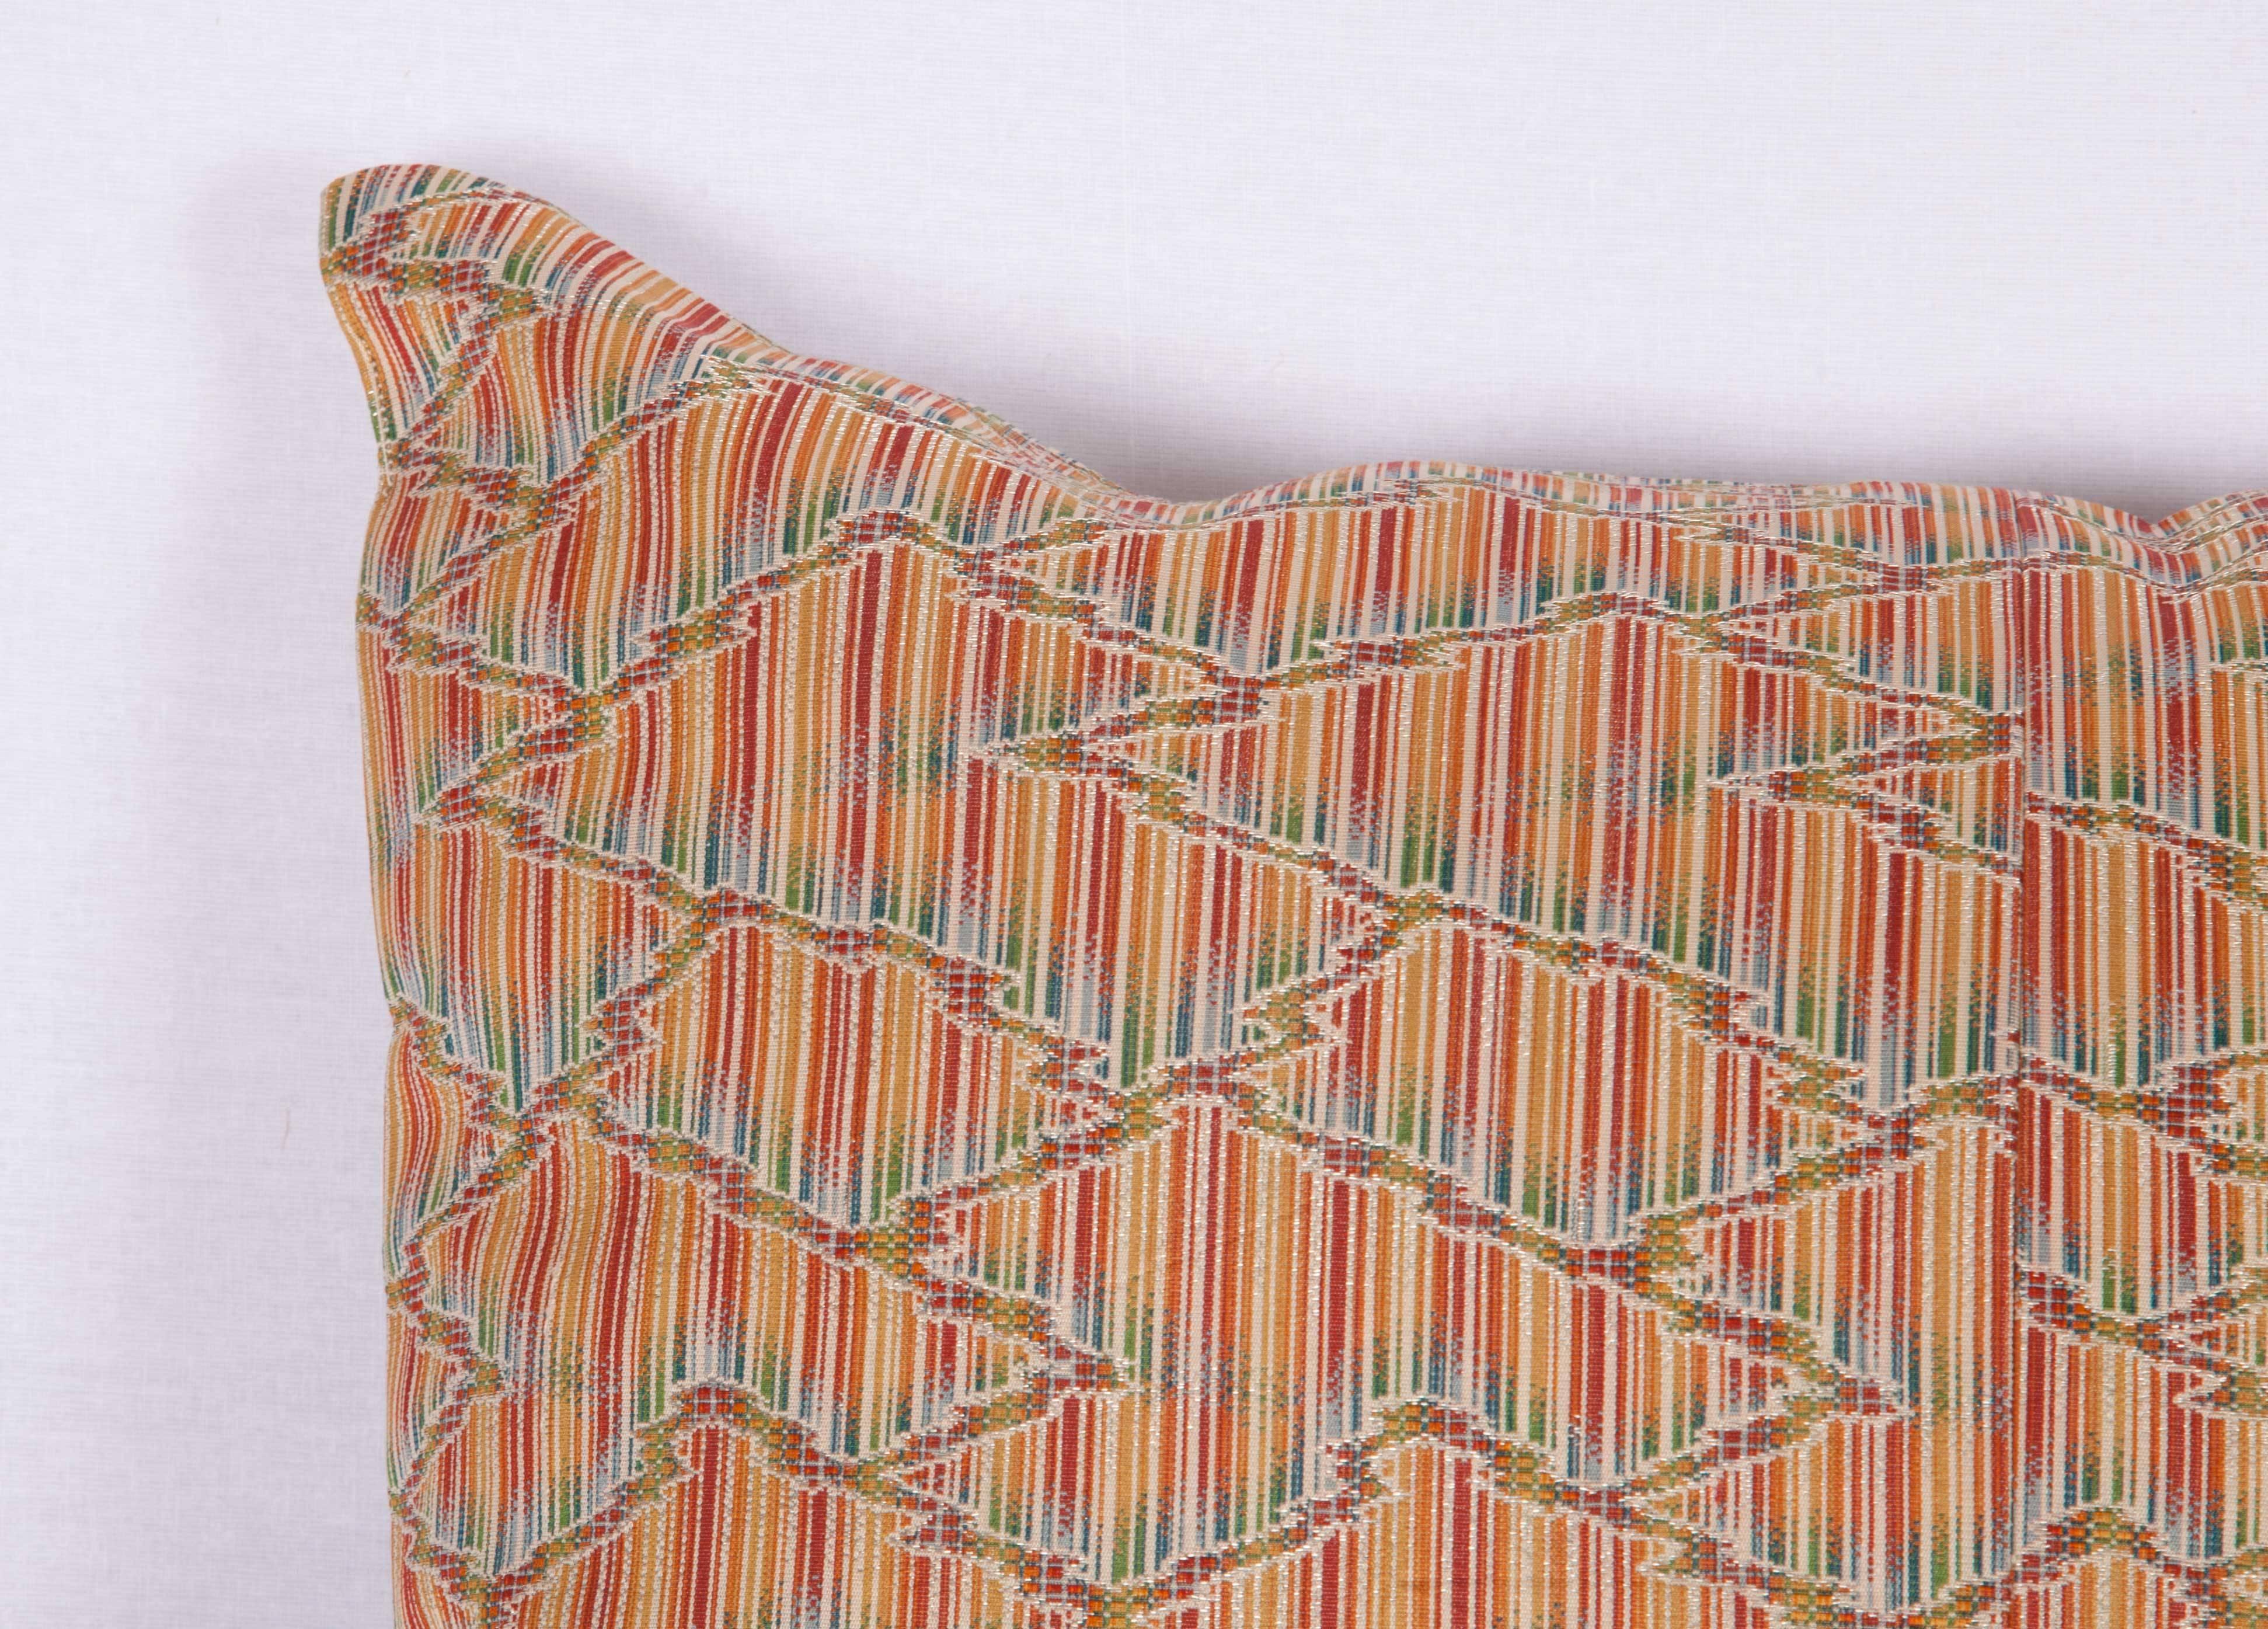 The pillow is made out of mid-20th century, Japanese silk obi. It does not come with an insert but it comes with a bag made to the size and out of cotton to accommodate the filling. The backing is made of linen. Please note 'filling is not